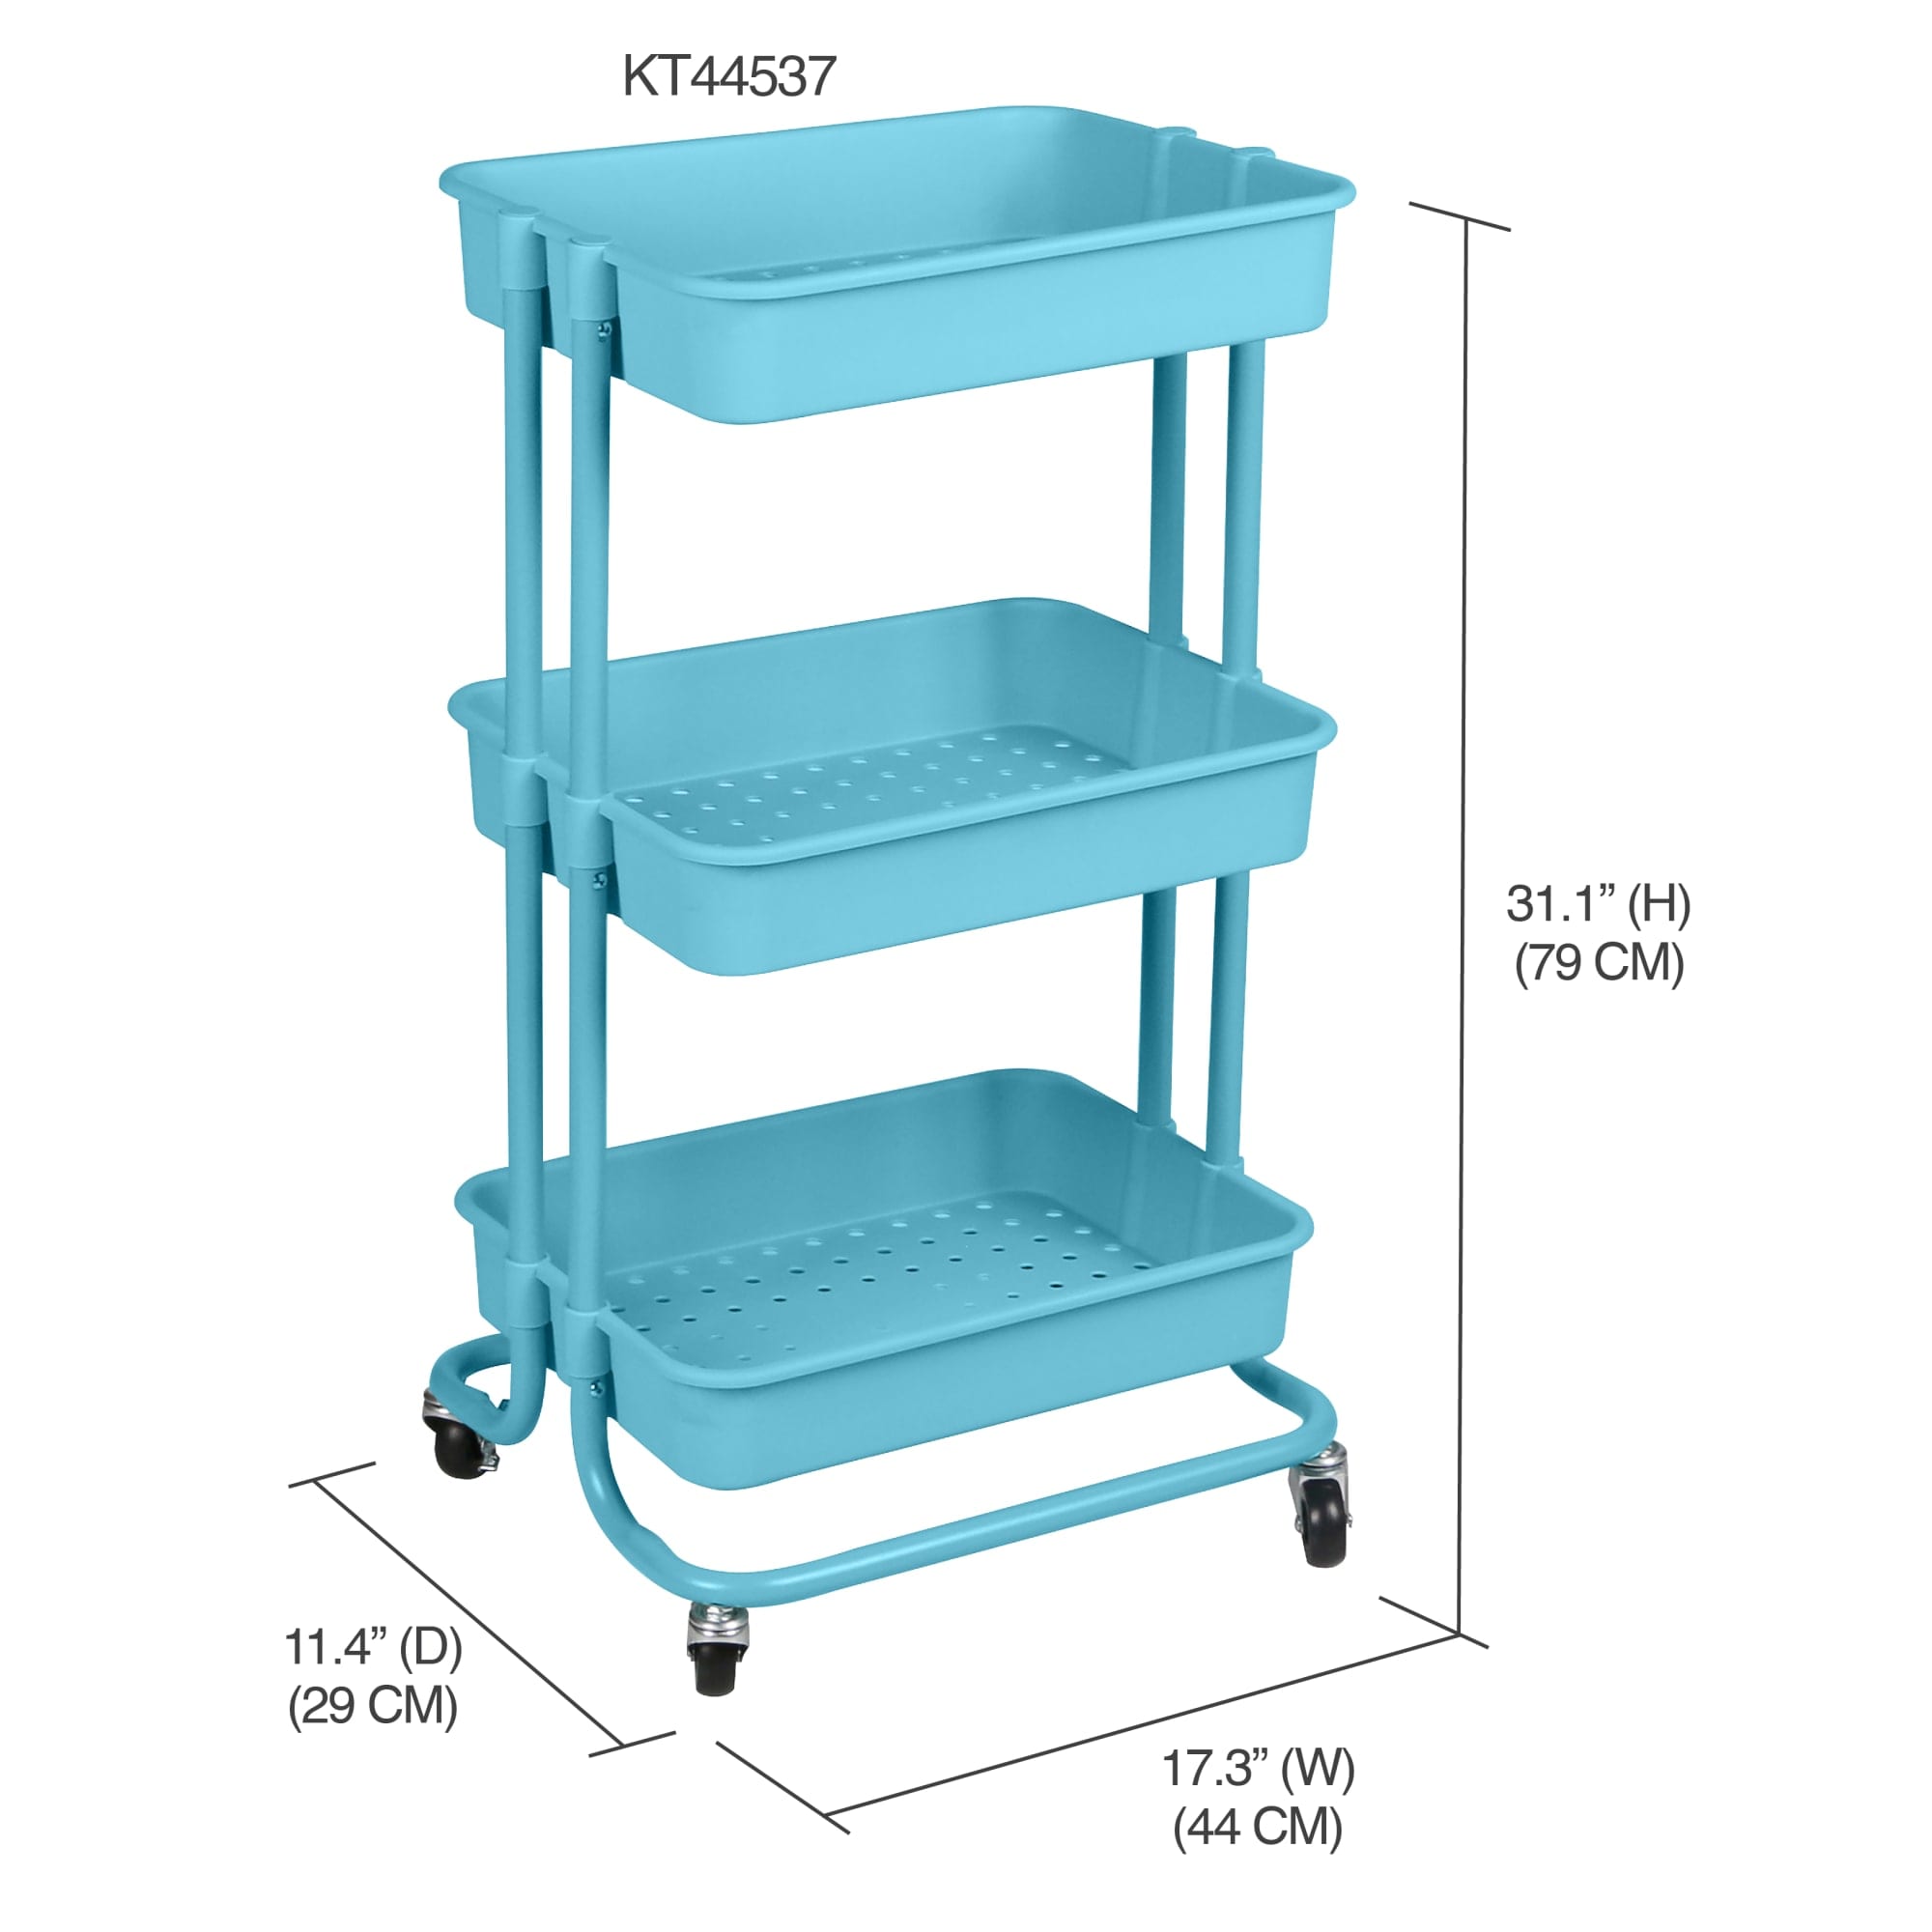 Home Basics 3 Tier Steel Rolling Utility Cart with 2 Locking Wheels, Blue $30.00 EACH, CASE PACK OF 3